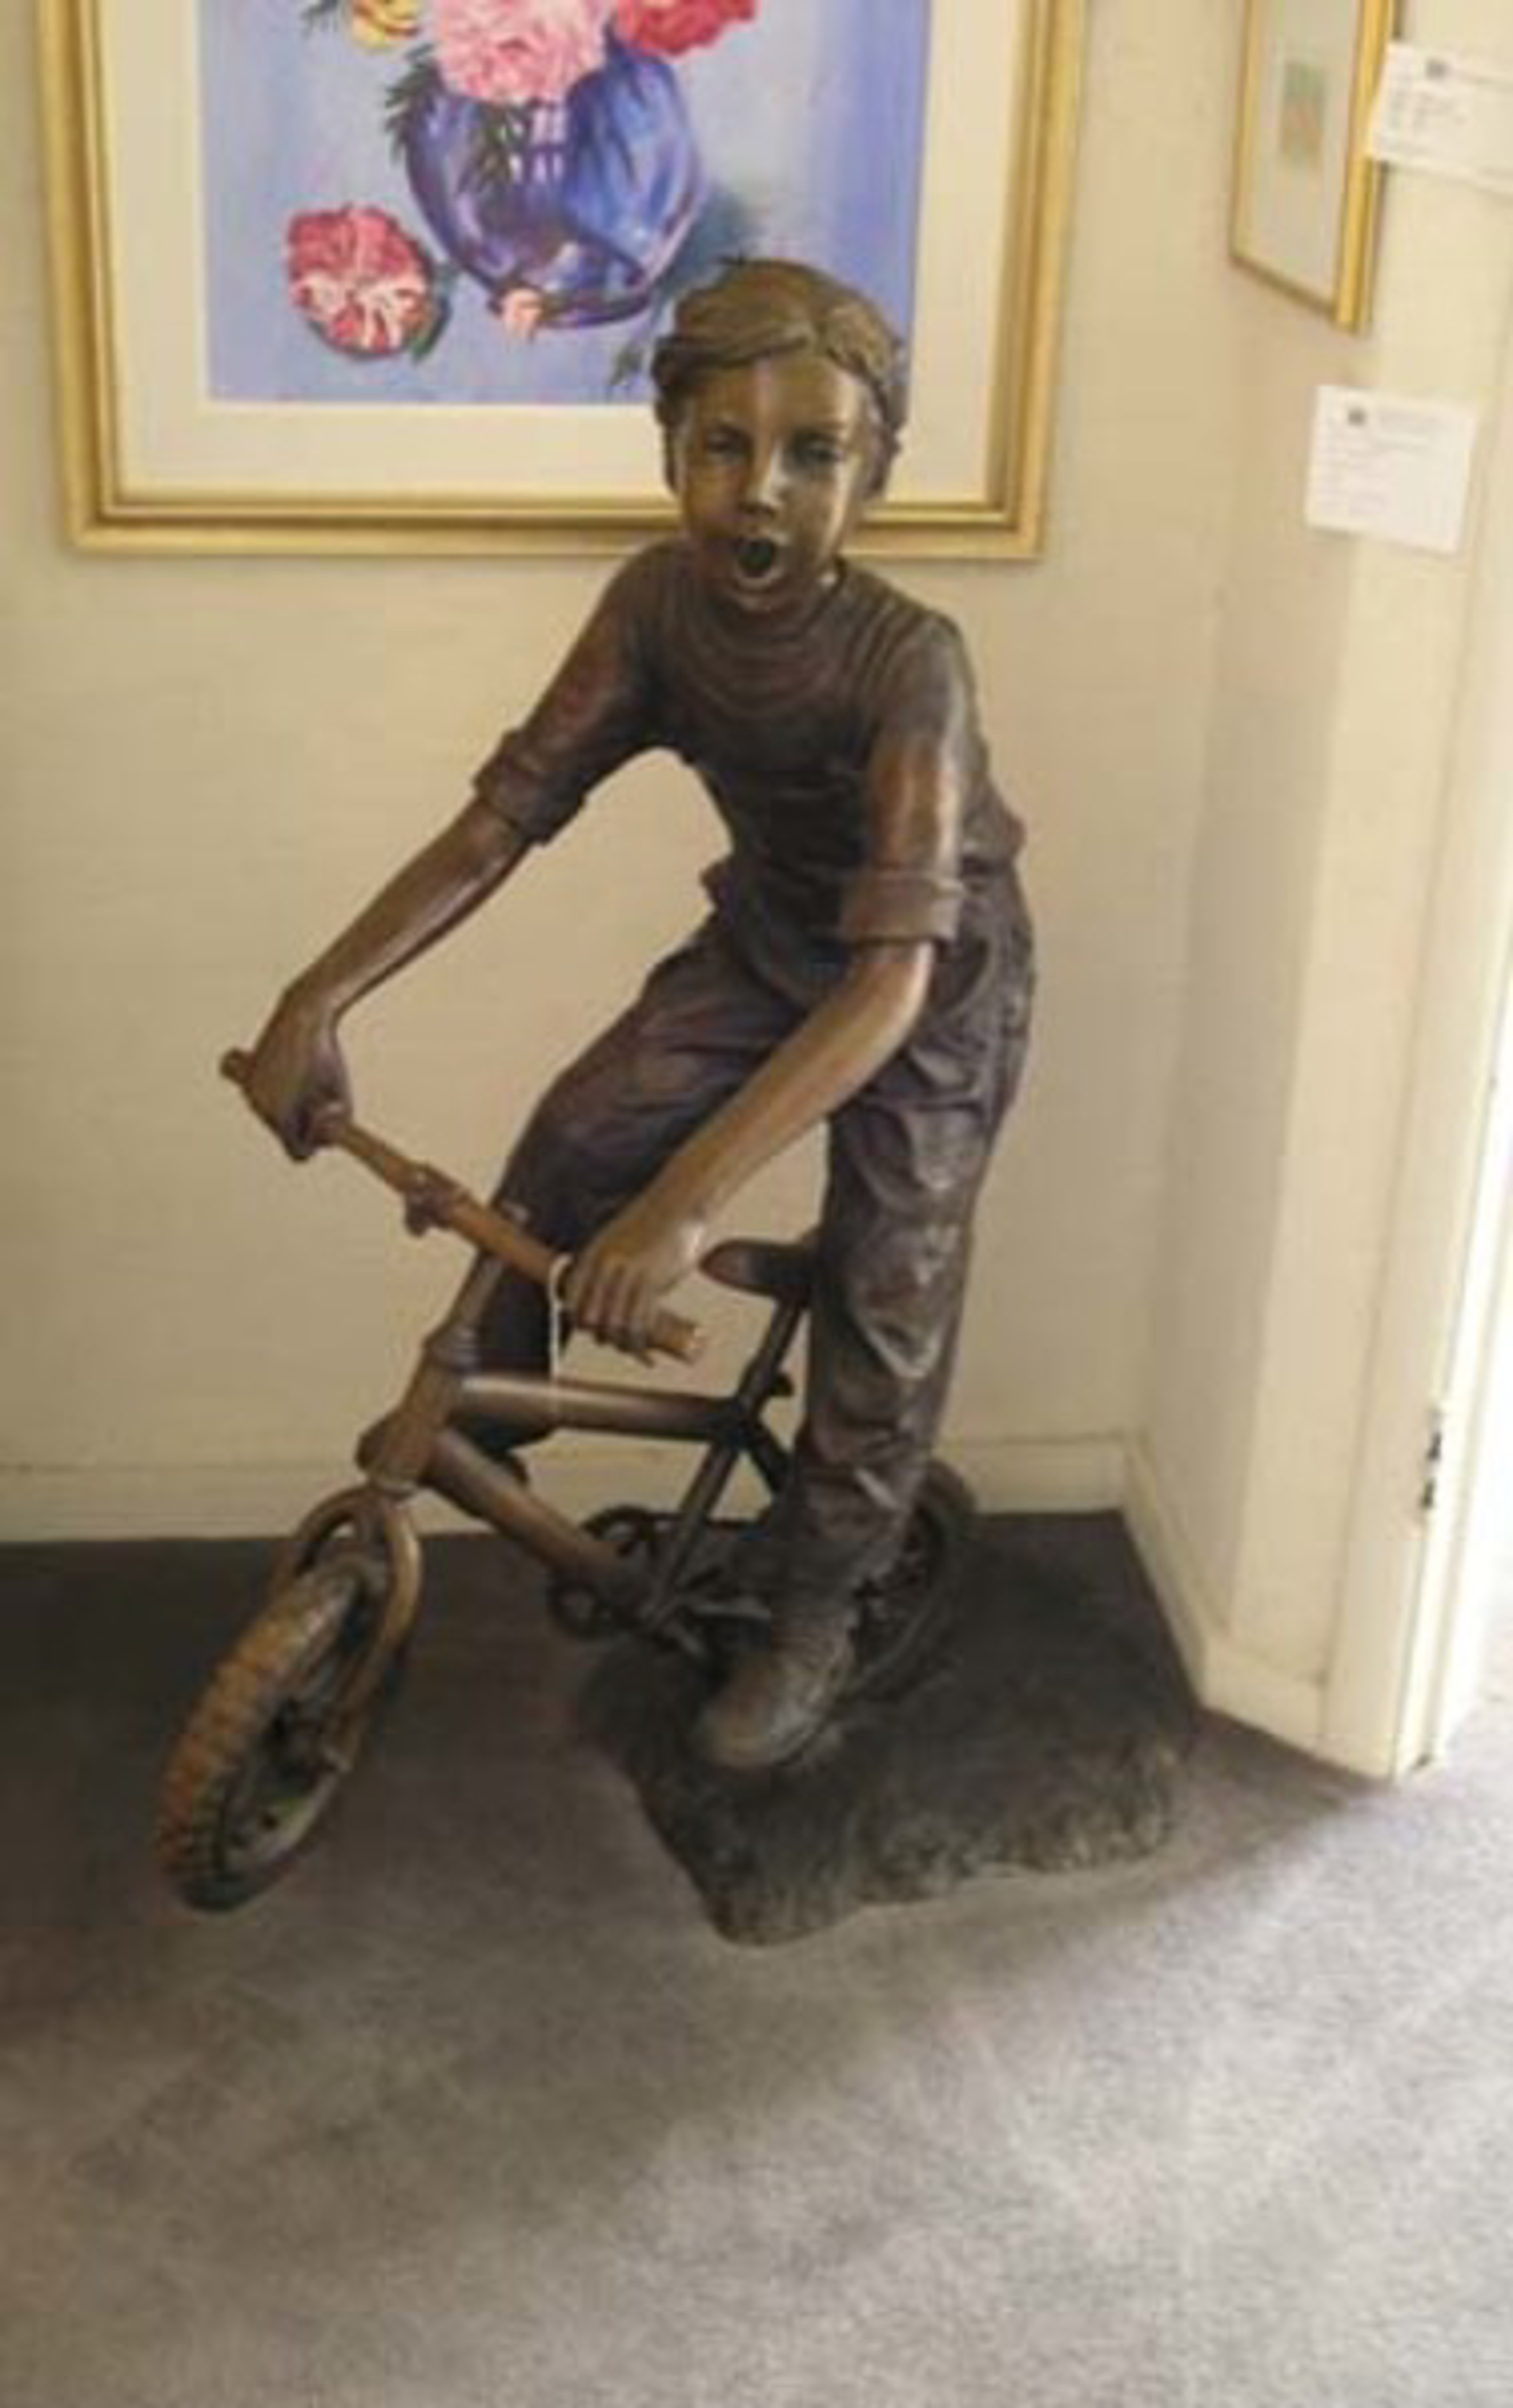 Boy On Bike by Moreau (inspired by a design by A. Moreau)